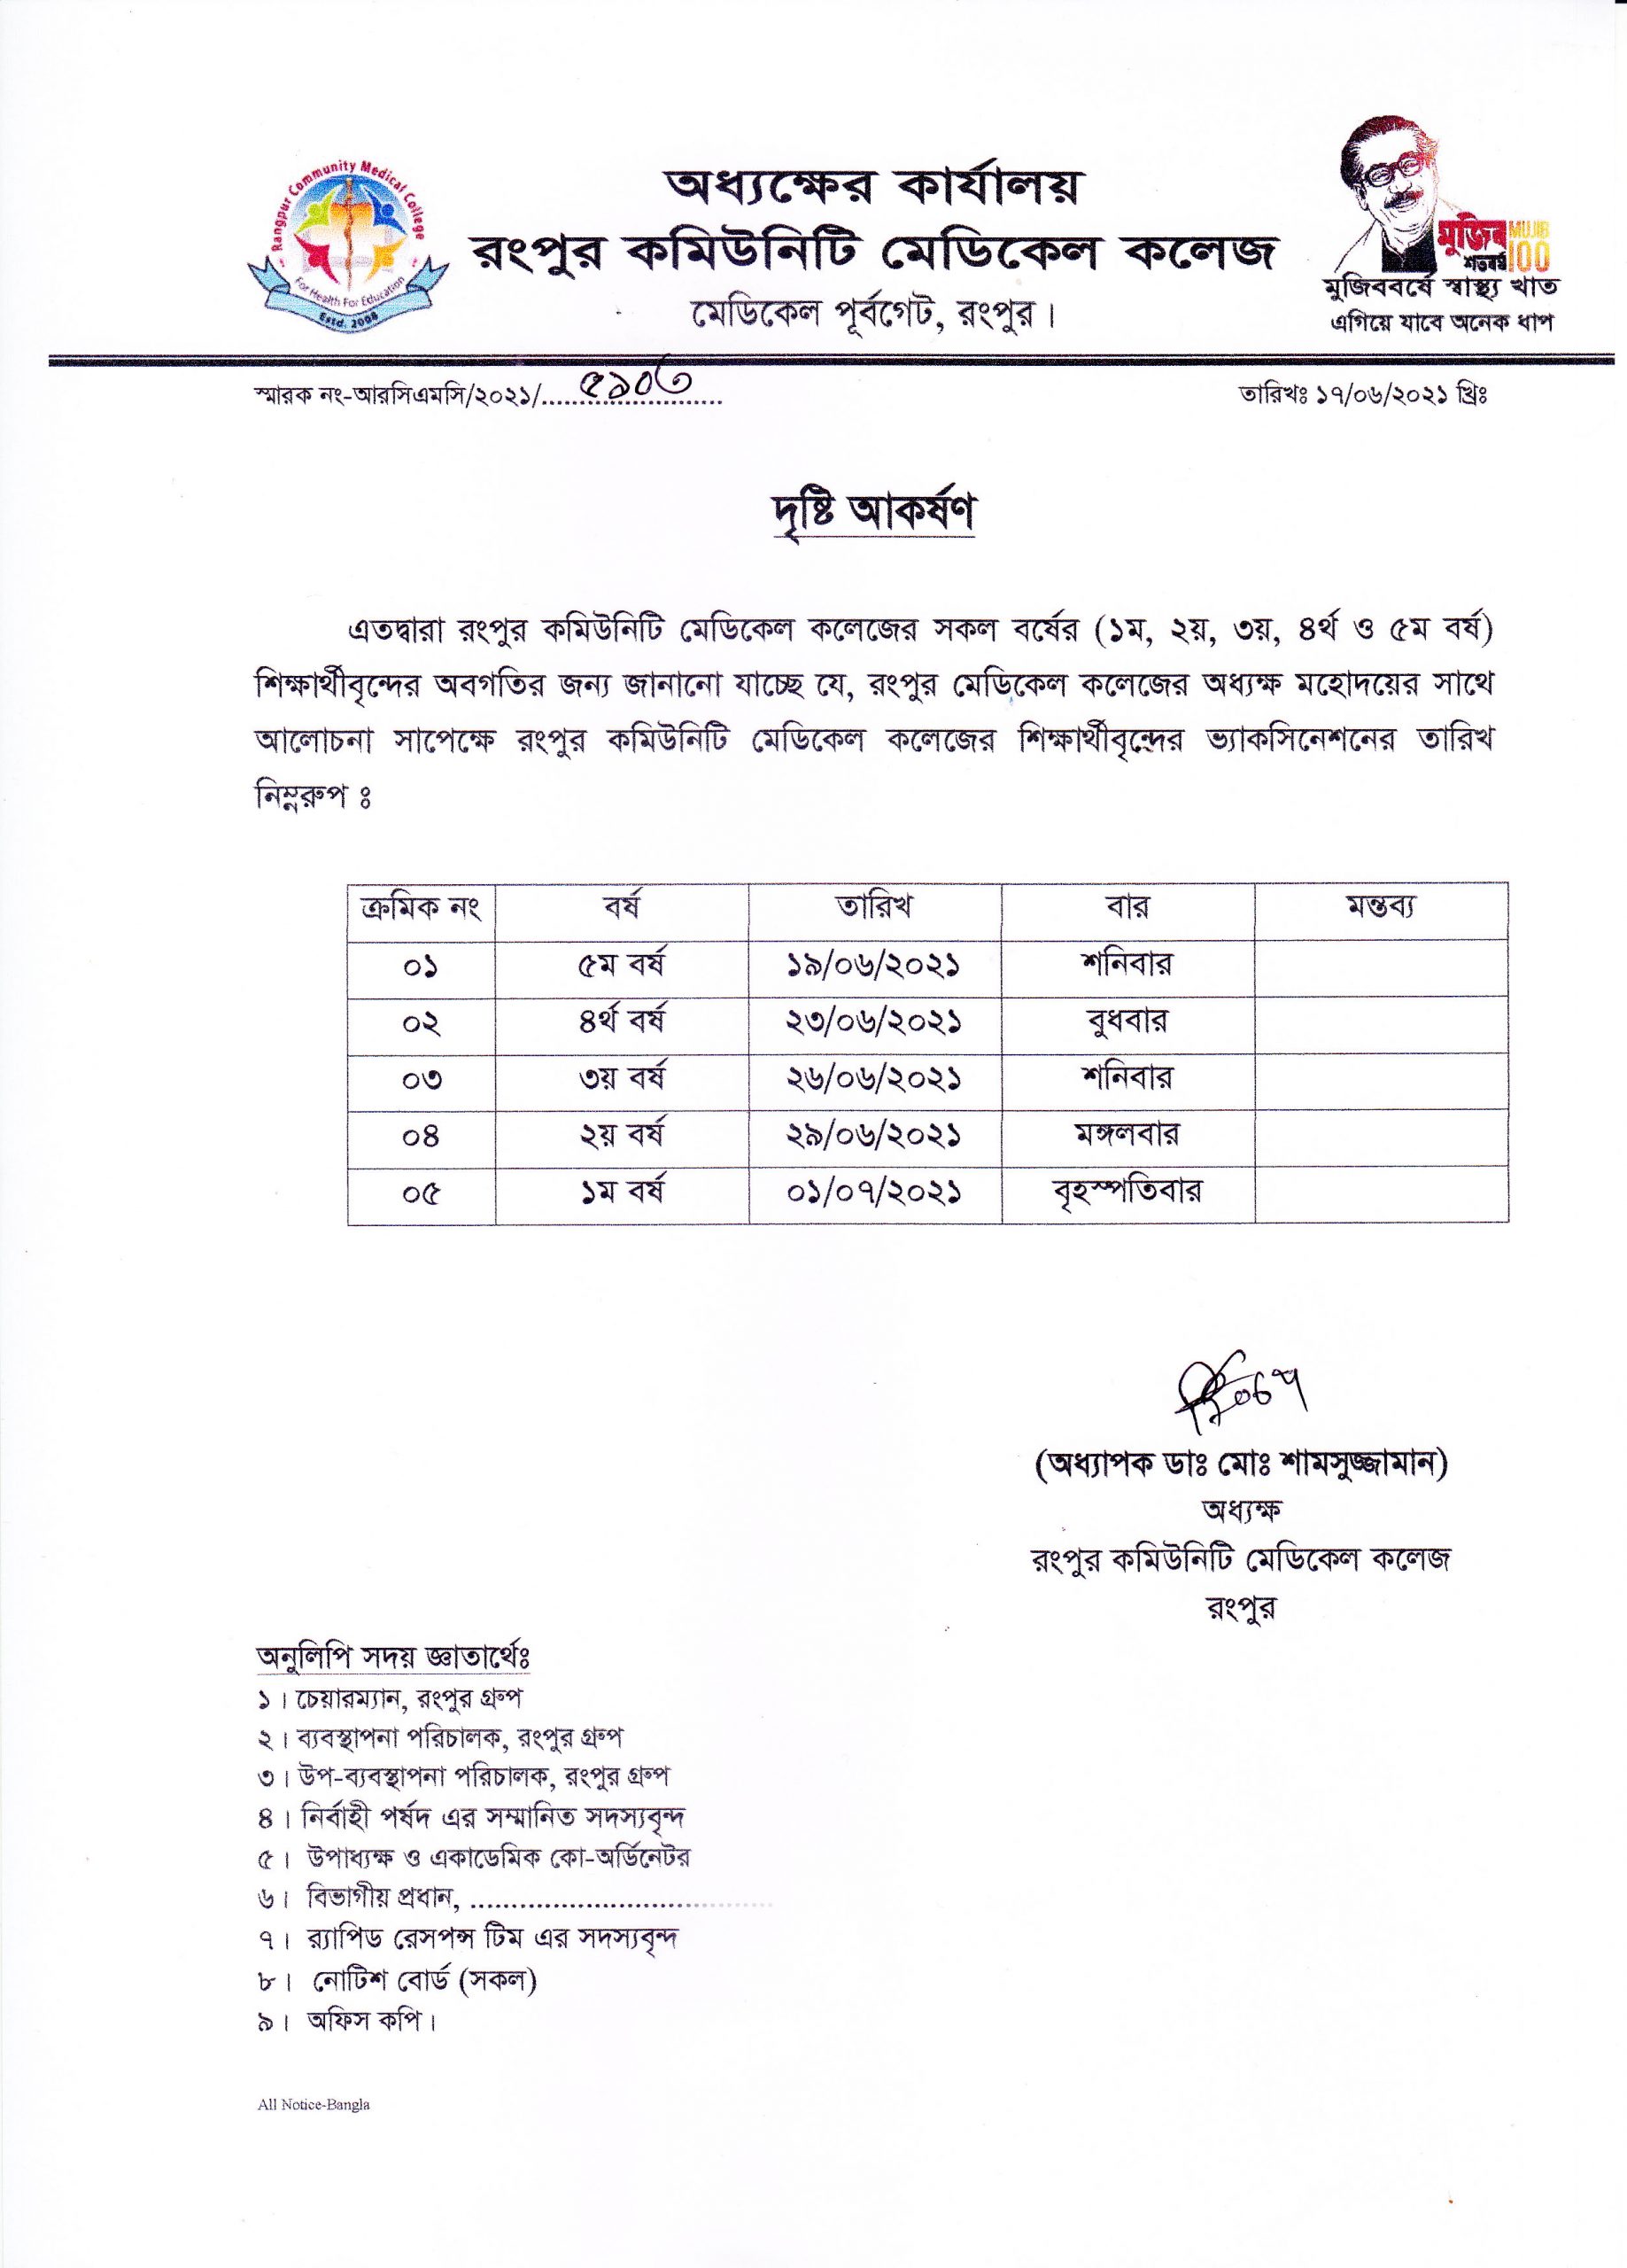 Schedules of Compulsury vaccination for COVID-19